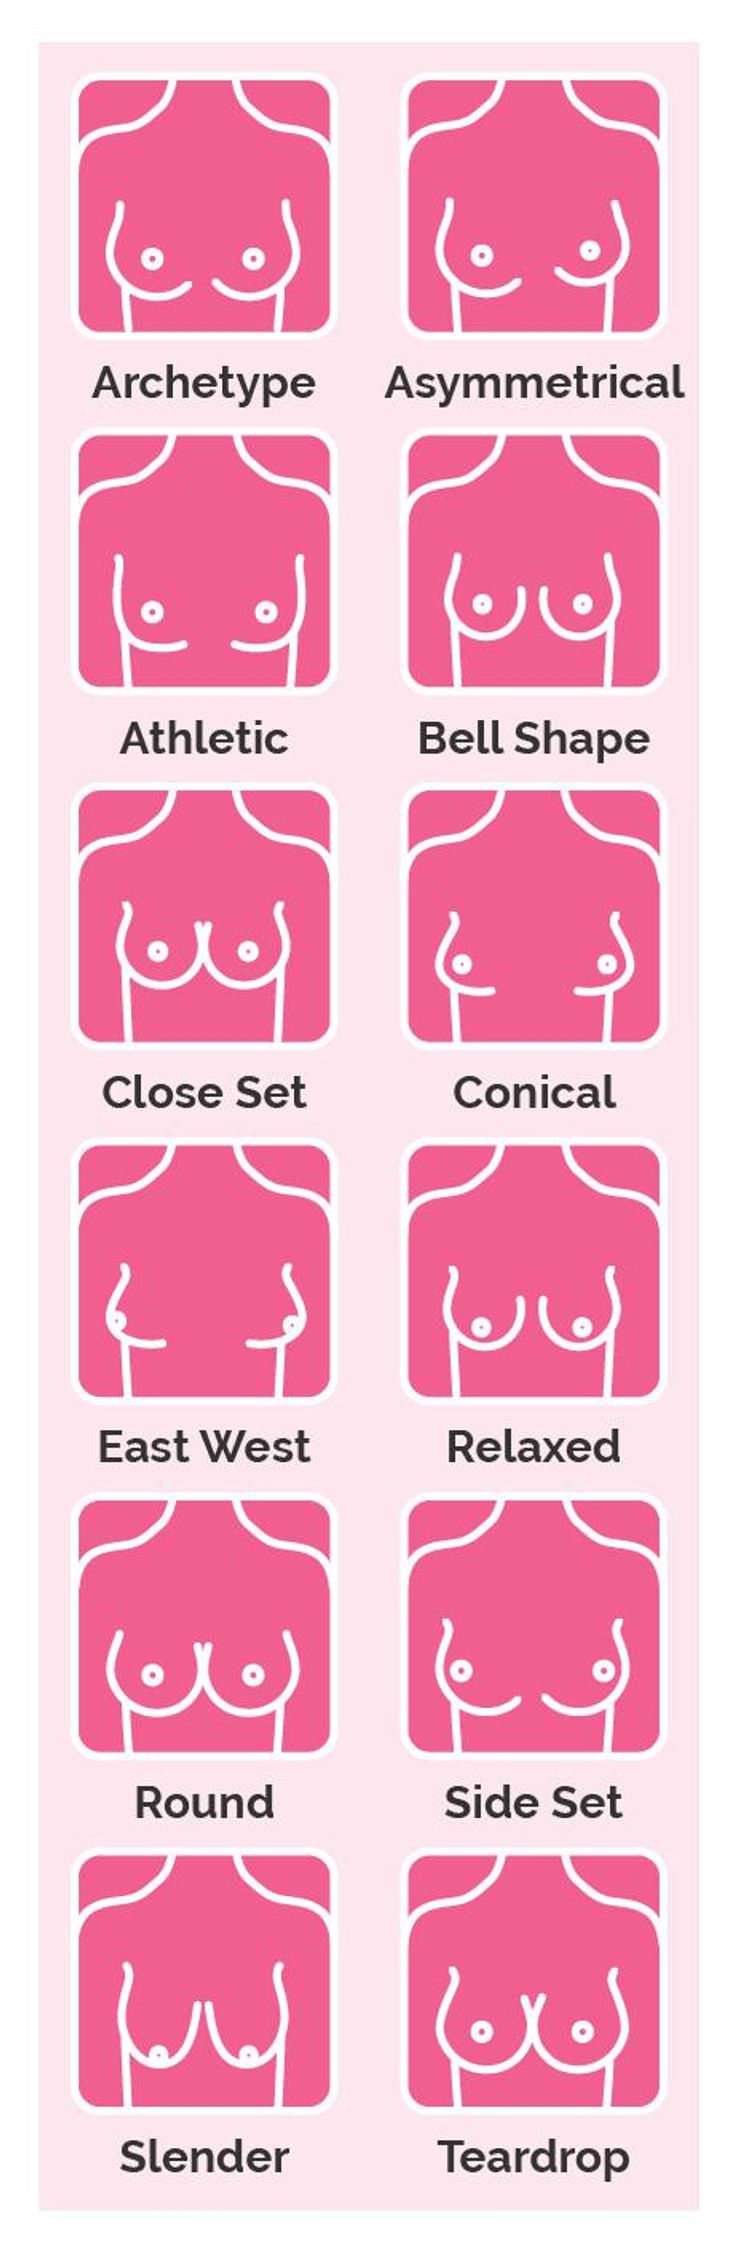 Various Structures And Dimensions Of Breast